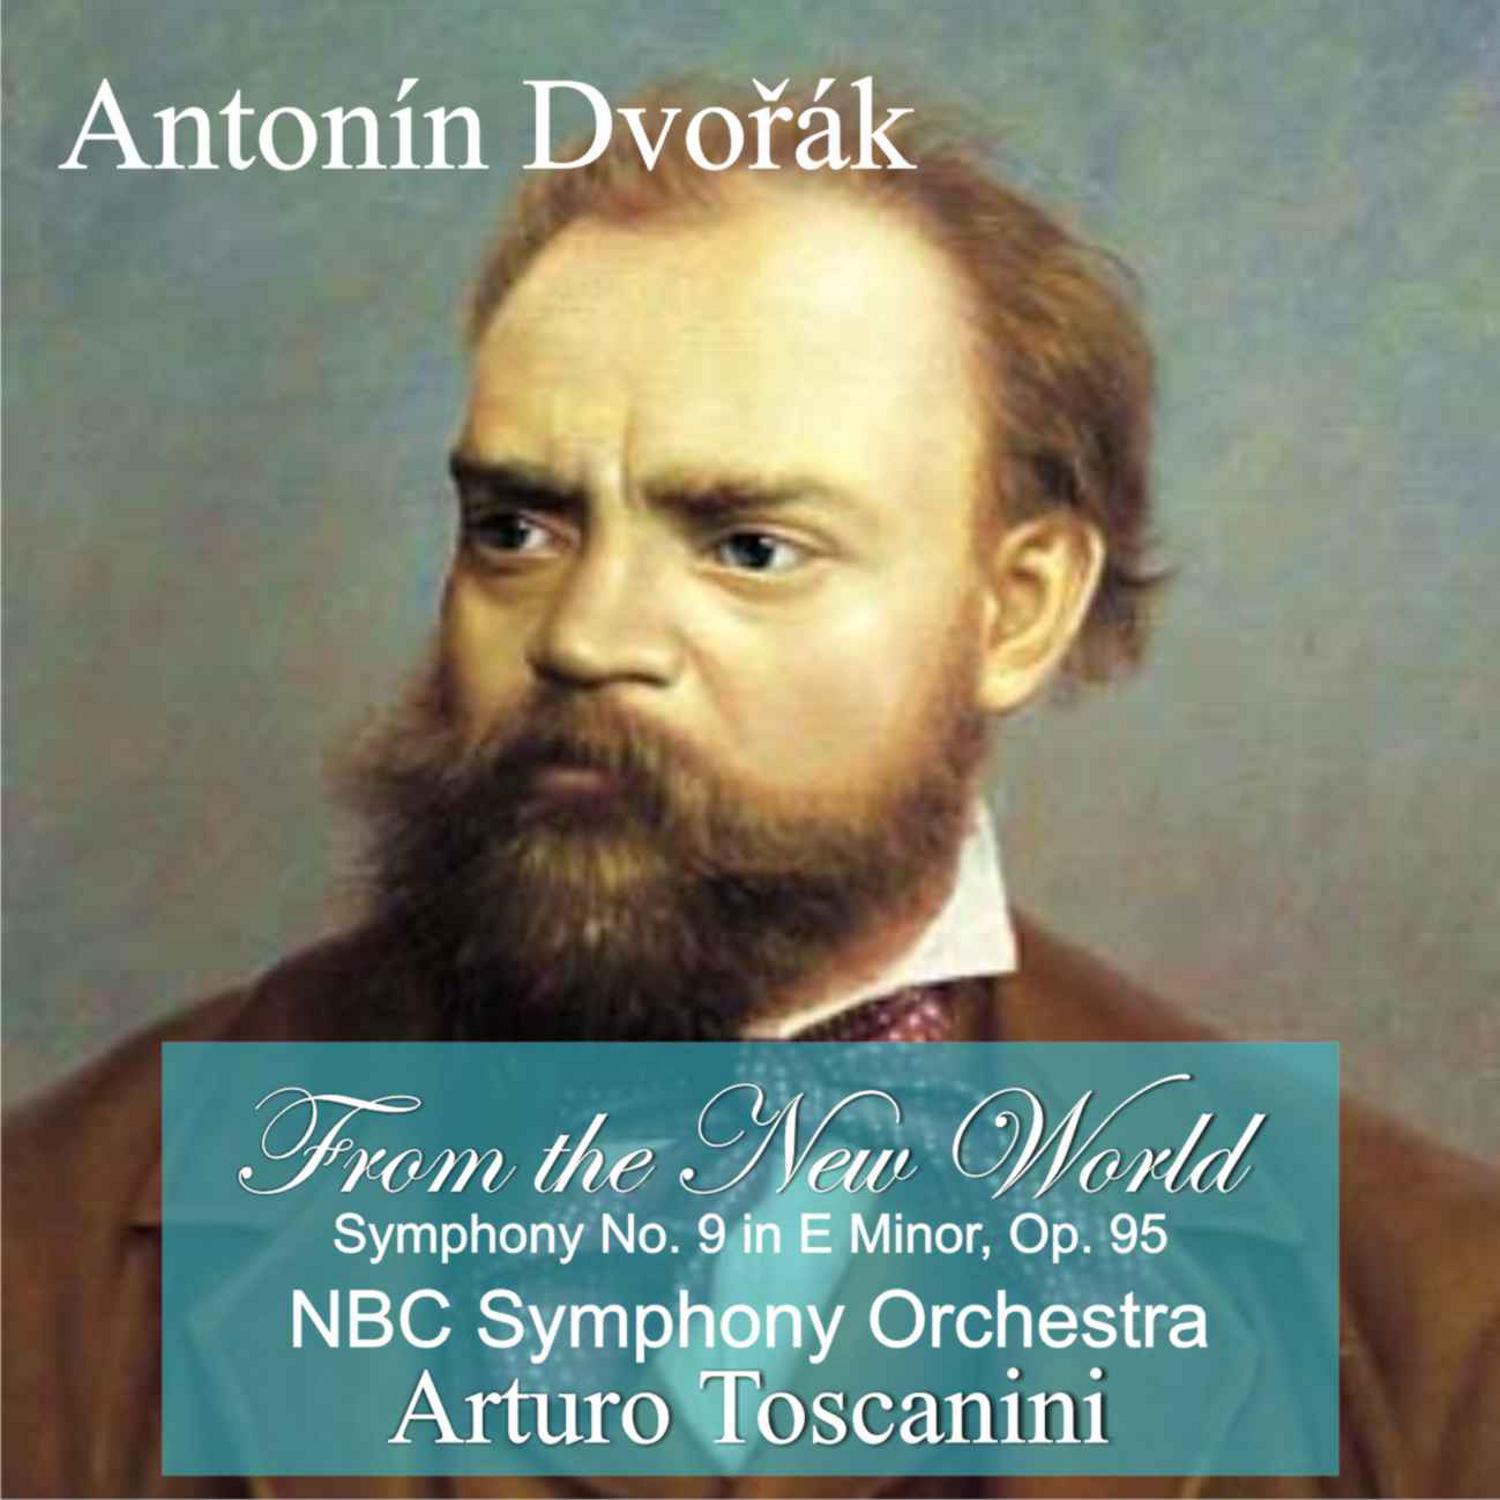 A. Dvoa k: " From the New World" Symphony No. 9 in E Minor, Op. 95